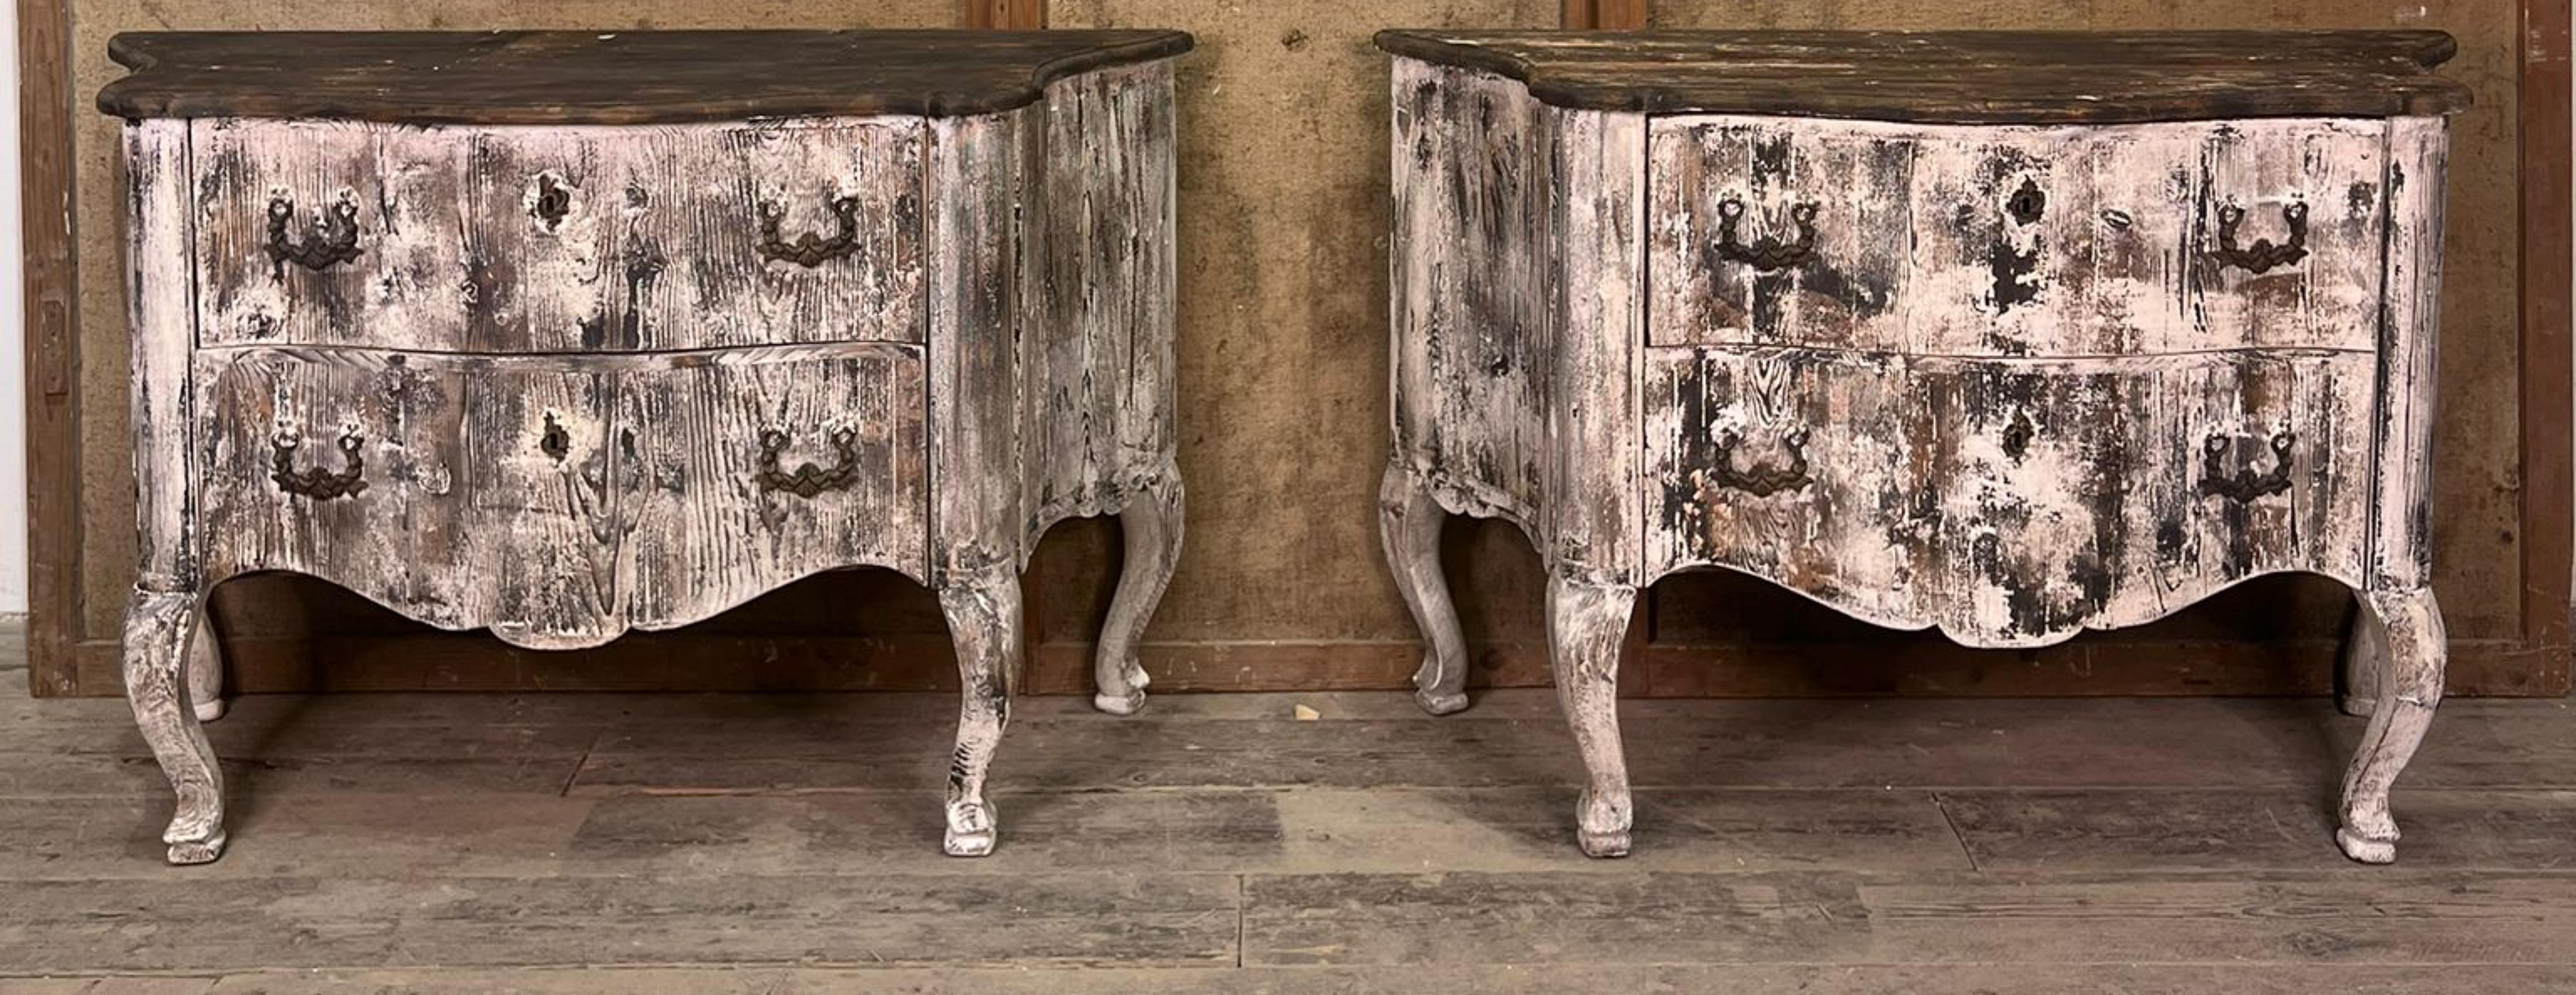 Beautiful Pair of Italian Chests of Drawers early 20th Century
Pine wood
perfectly preserved
Measurements with the upper floor:
142cm x 52cm x 2.5cm H: 92cm
Measurements without the upstairs:
105cm x 47cm x 90cm